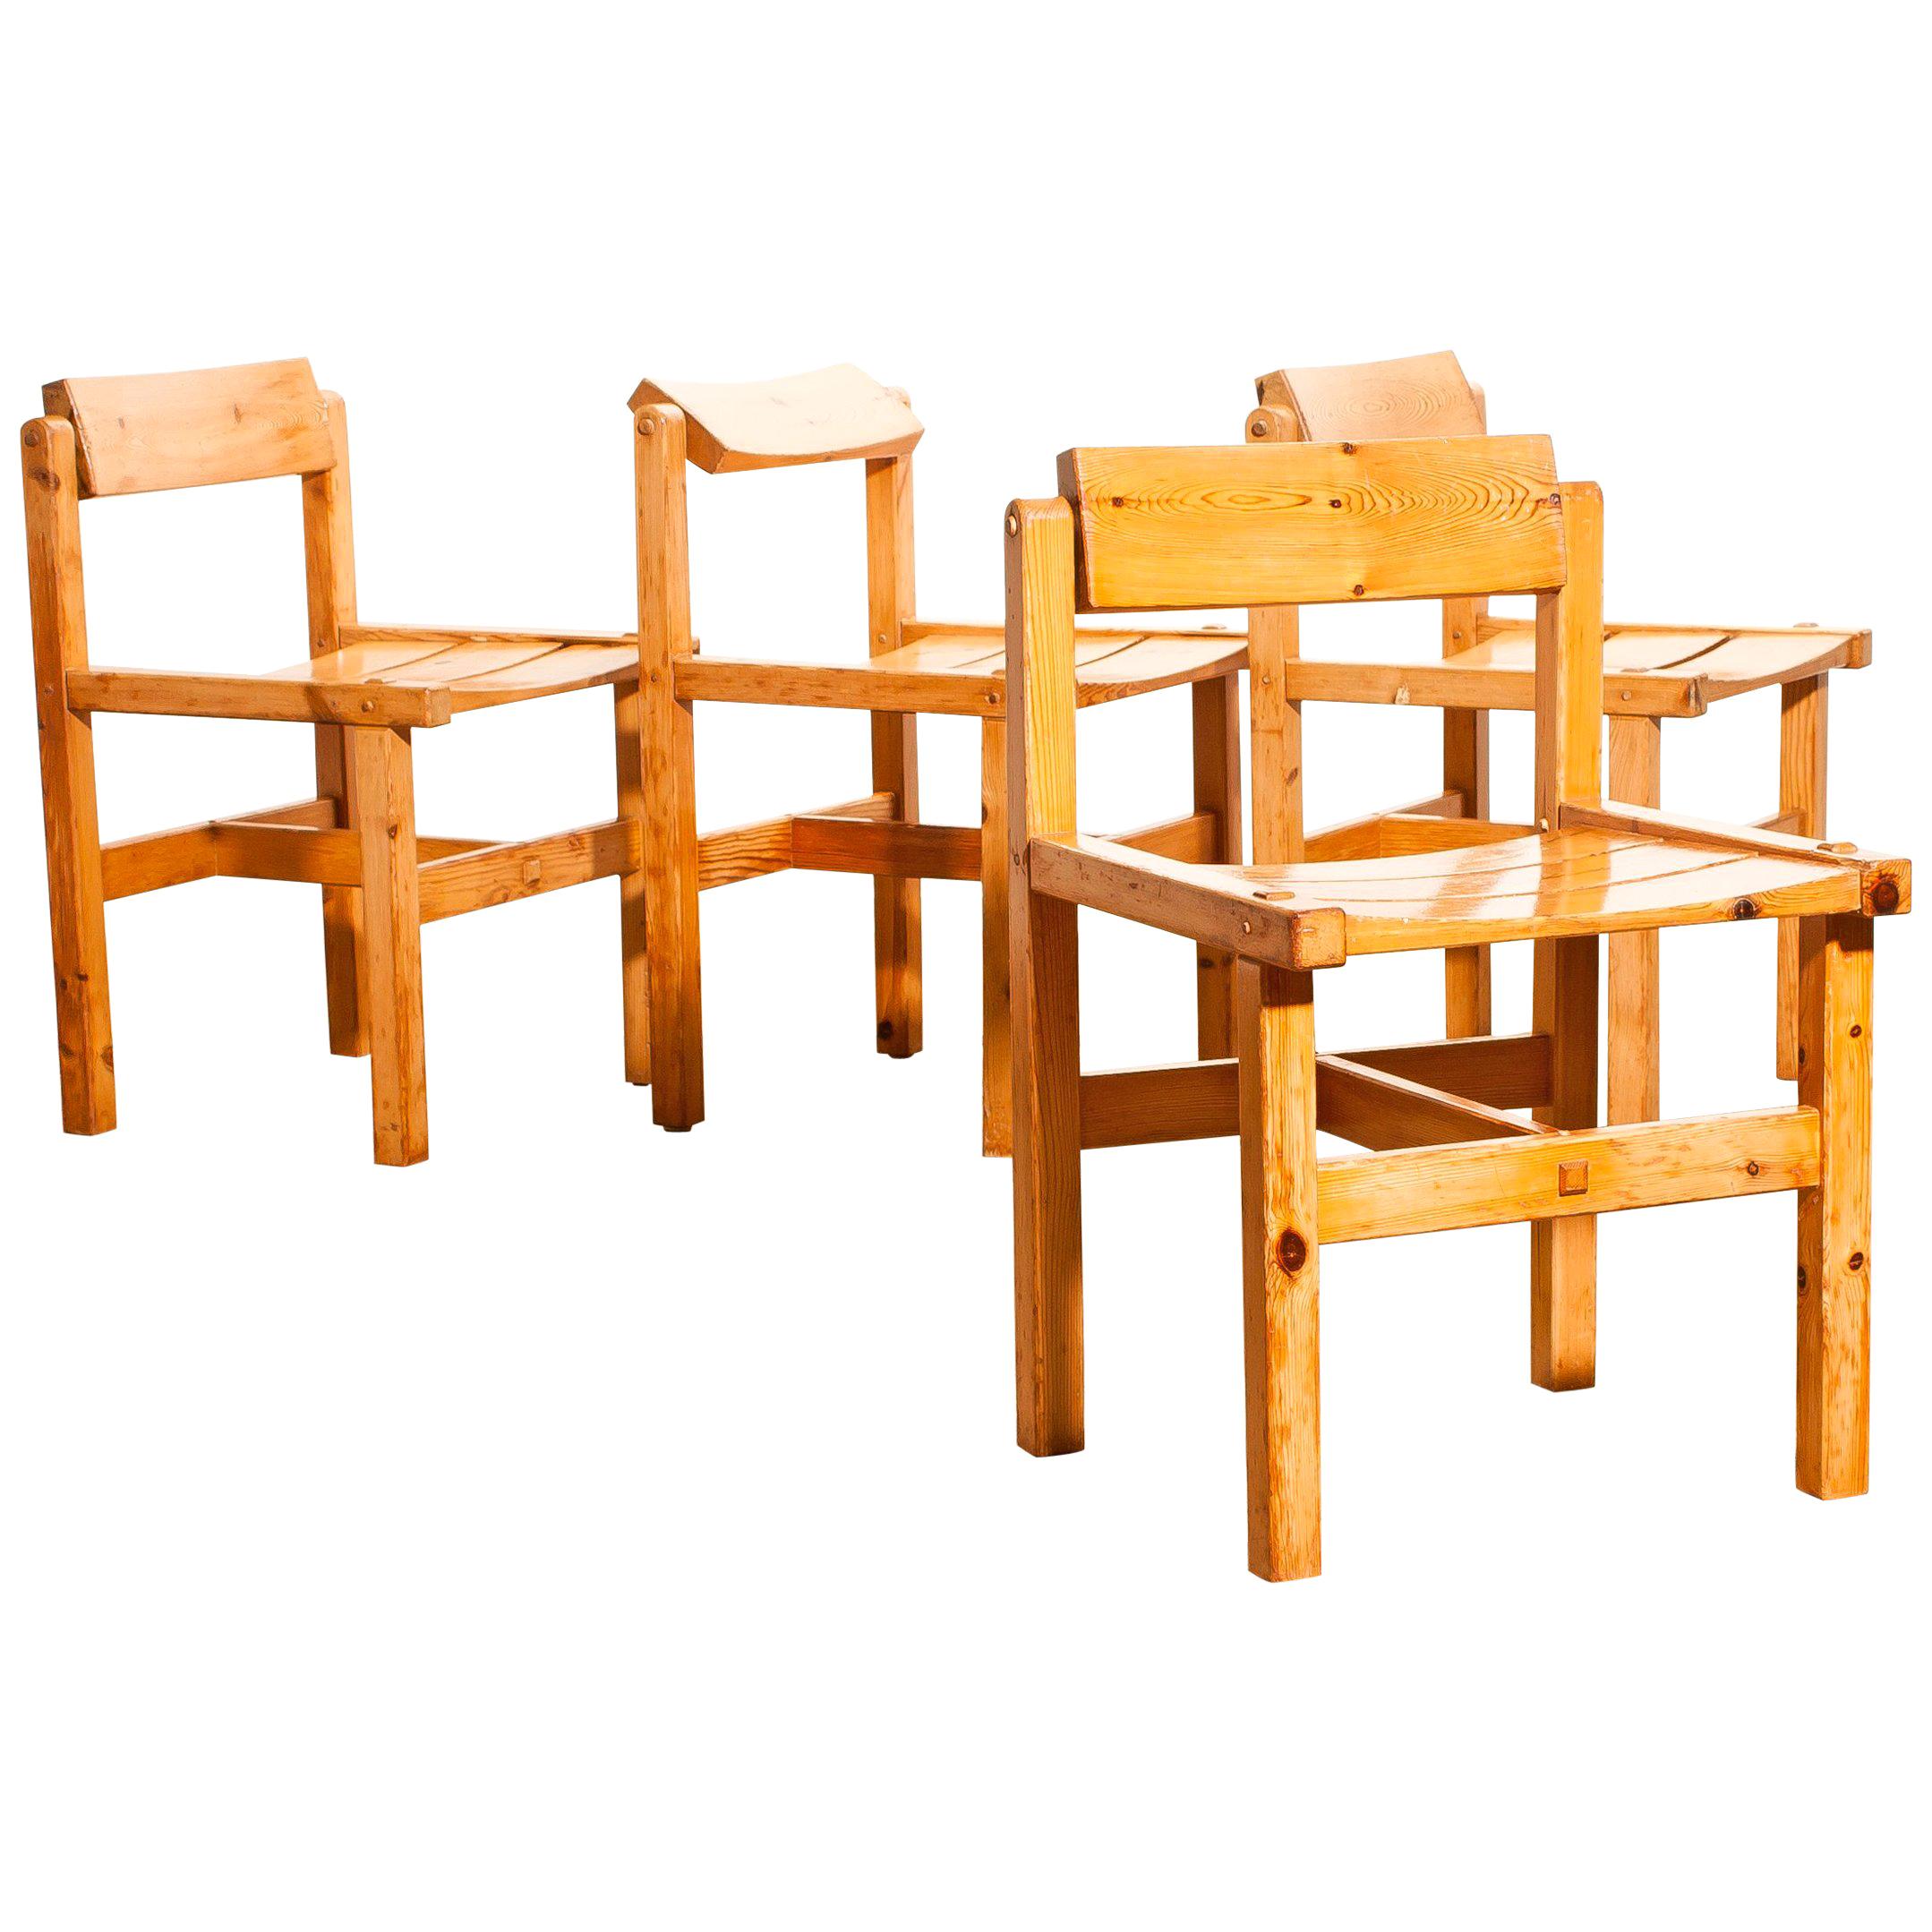 Very nice set of four chairs designed by Edvin Helseth.
These chairs are made of pine and they have turnable backrests.
They are in a beautiful used condition.
Period 1960s.
Dimensions: H 74 cm, W 47 cm, D 41 cm, SH 47 cm.